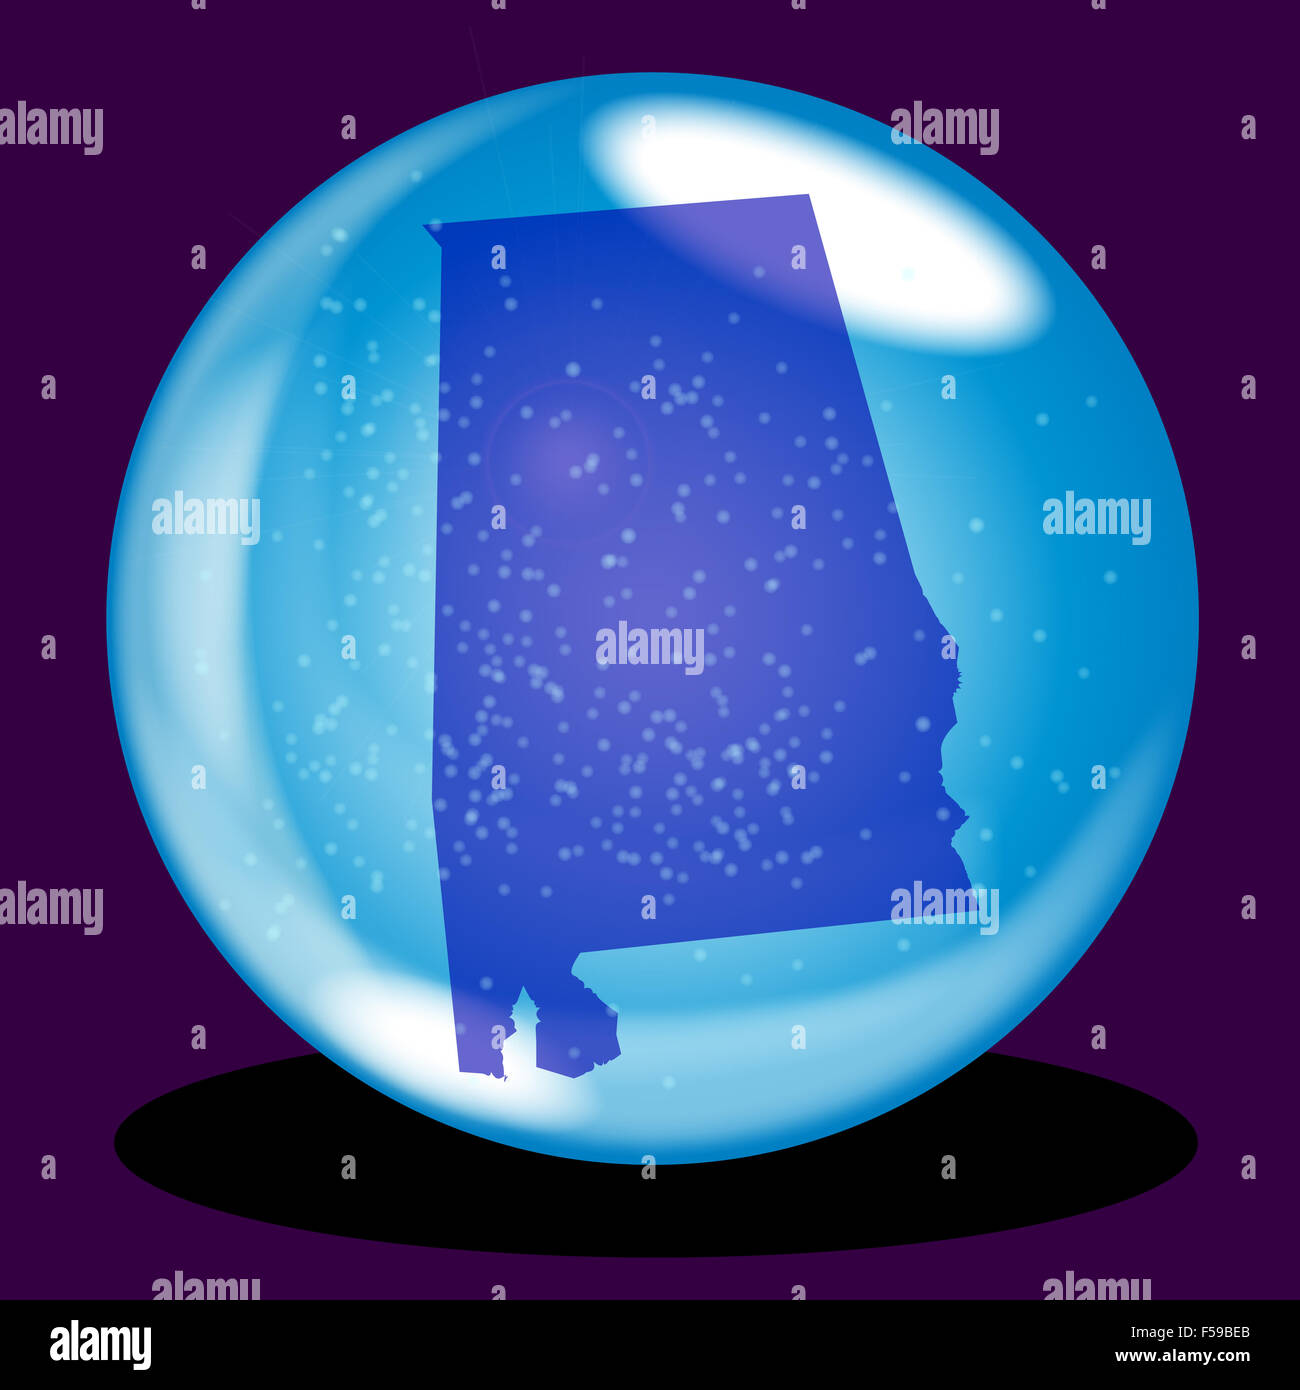 A crystal ball with the state of Alabama map and snow over a purple